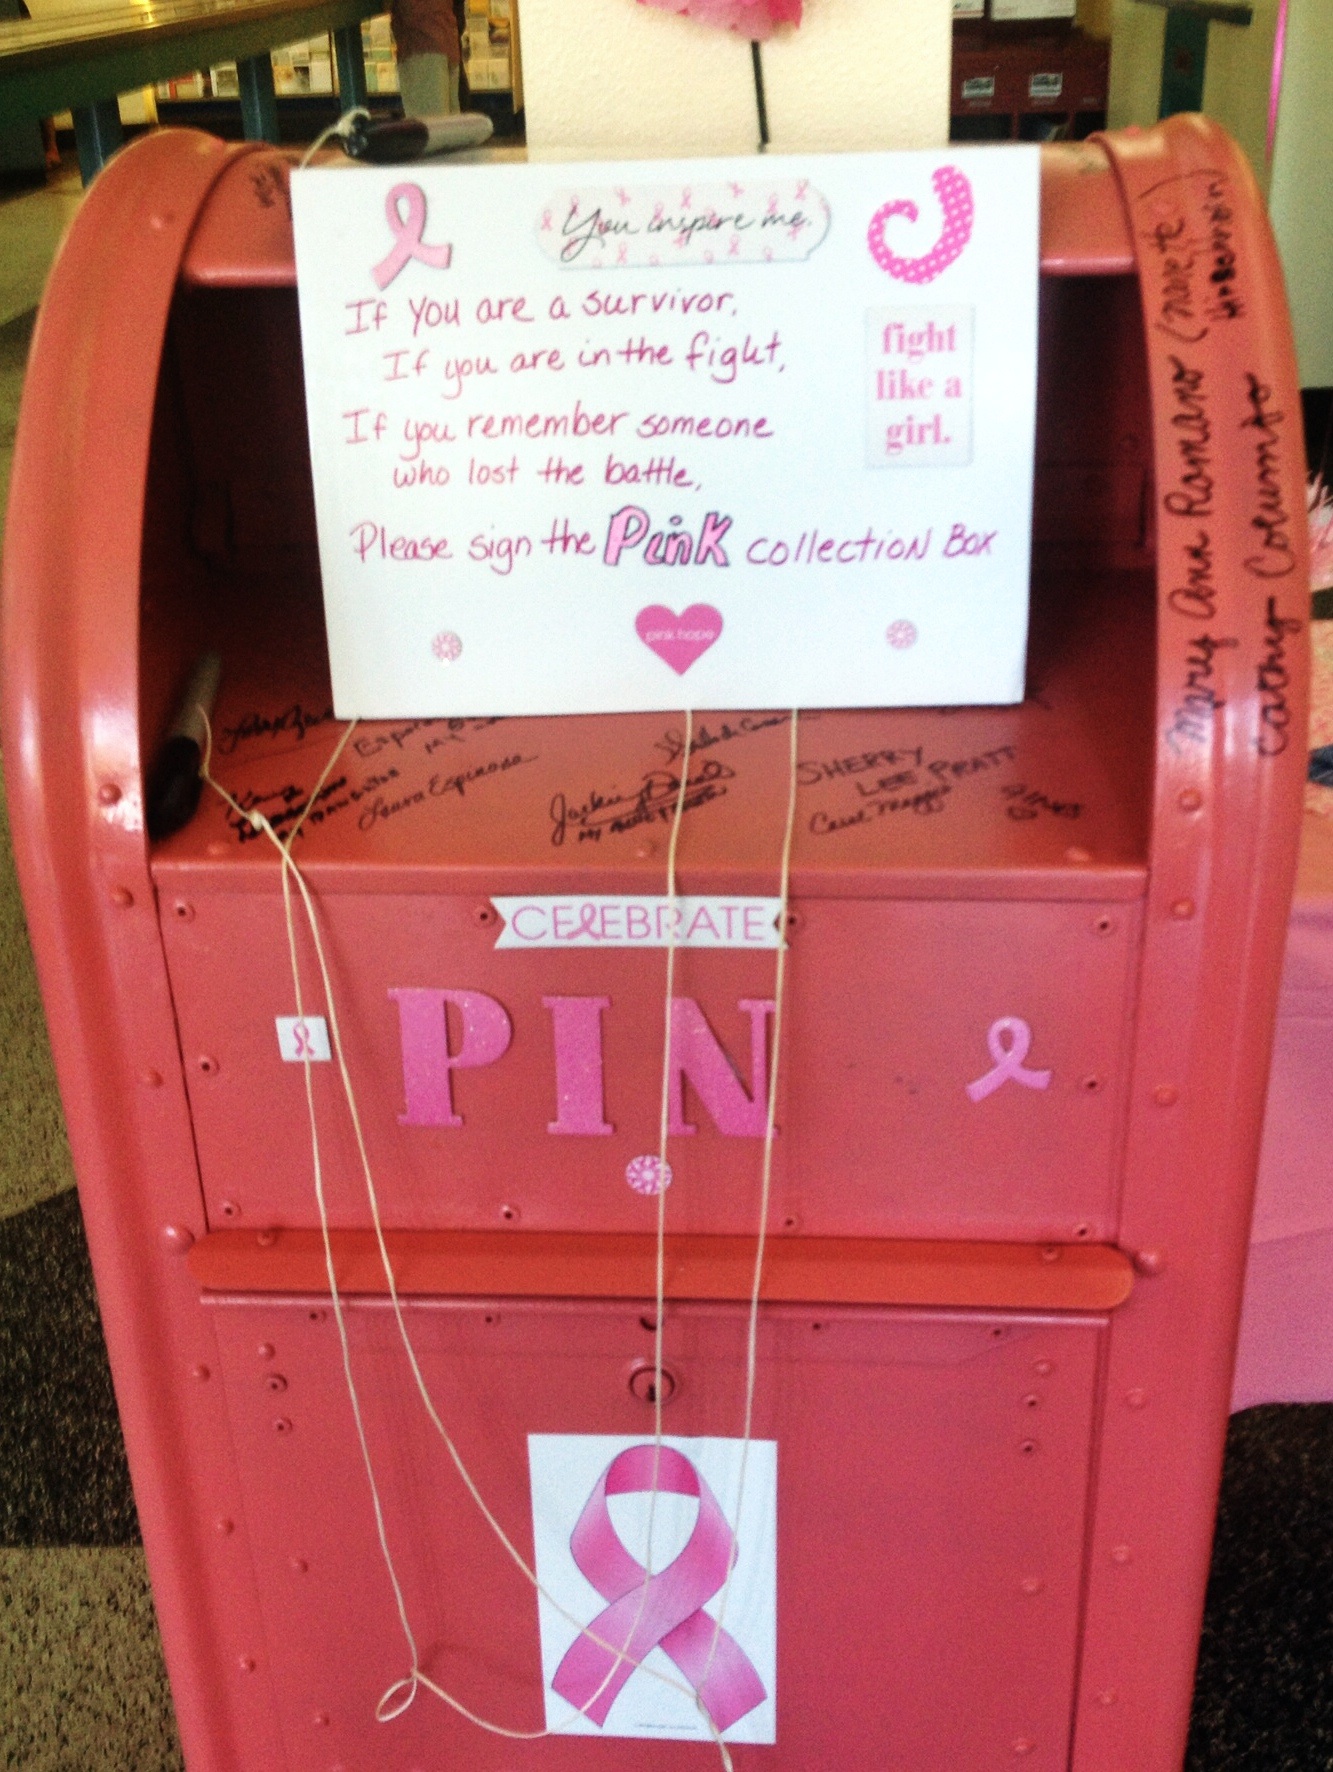 Pink Collection Box Post Office San Rafel